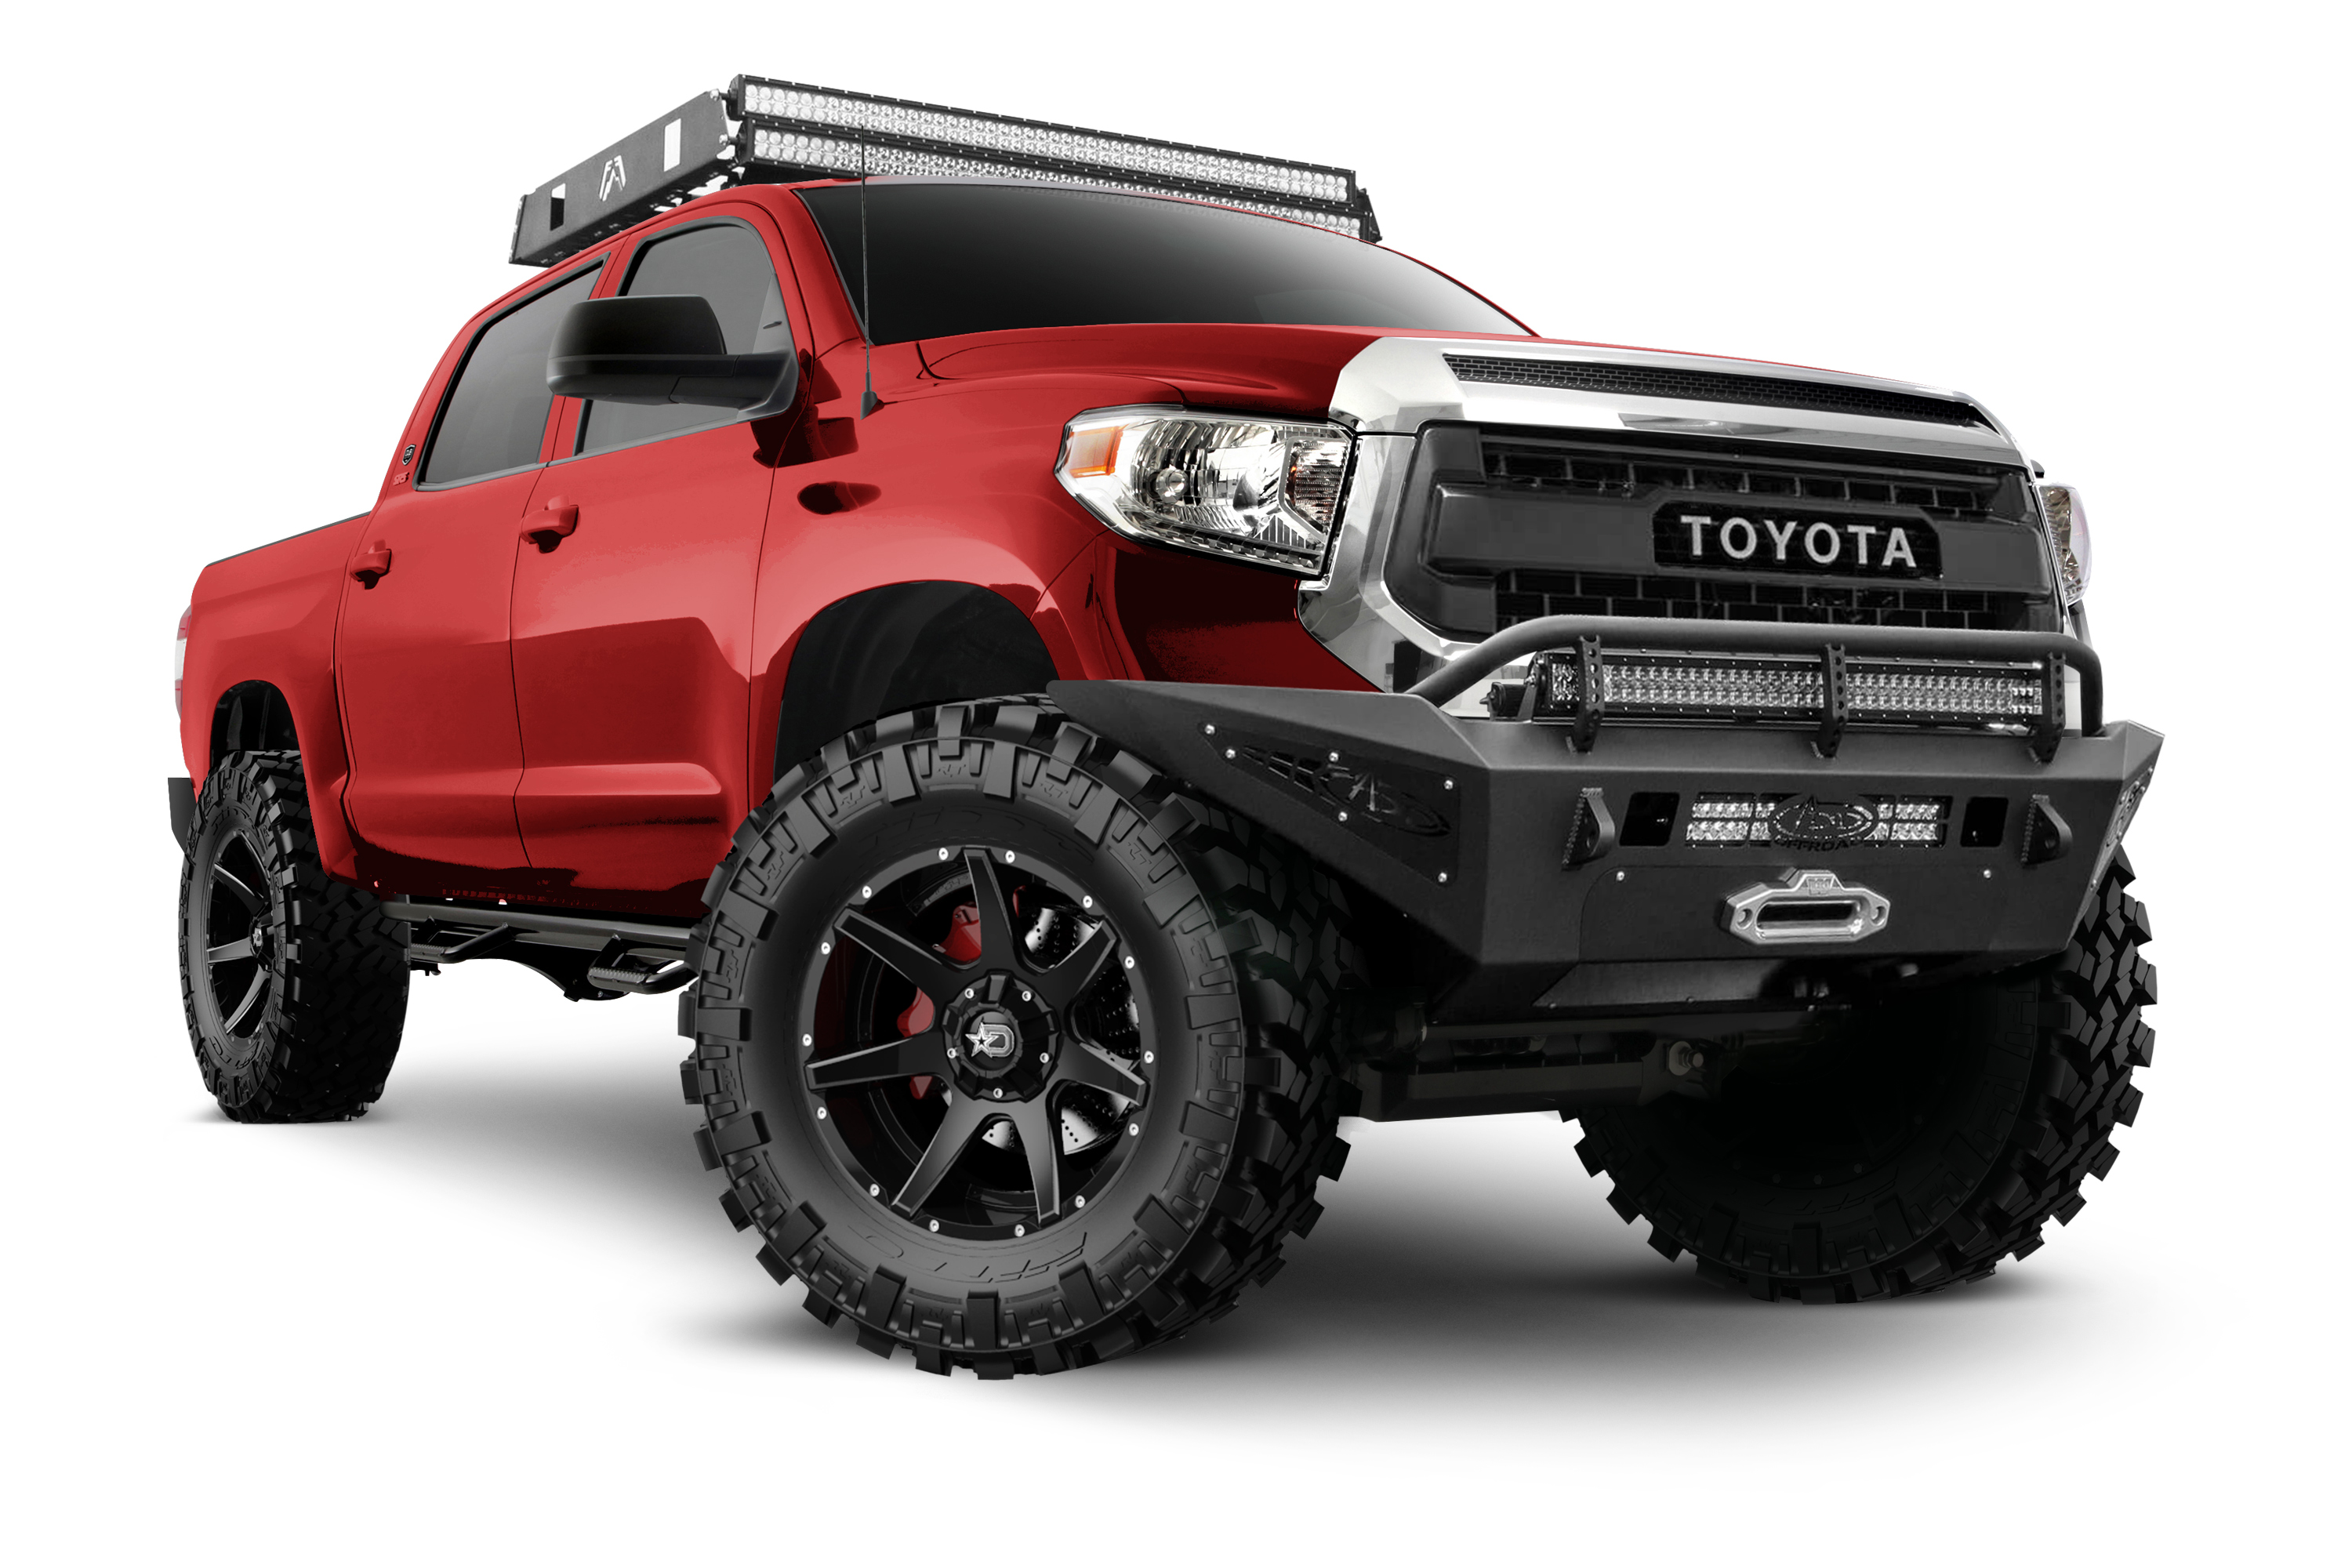 toyota_tundra_red_ds647bm